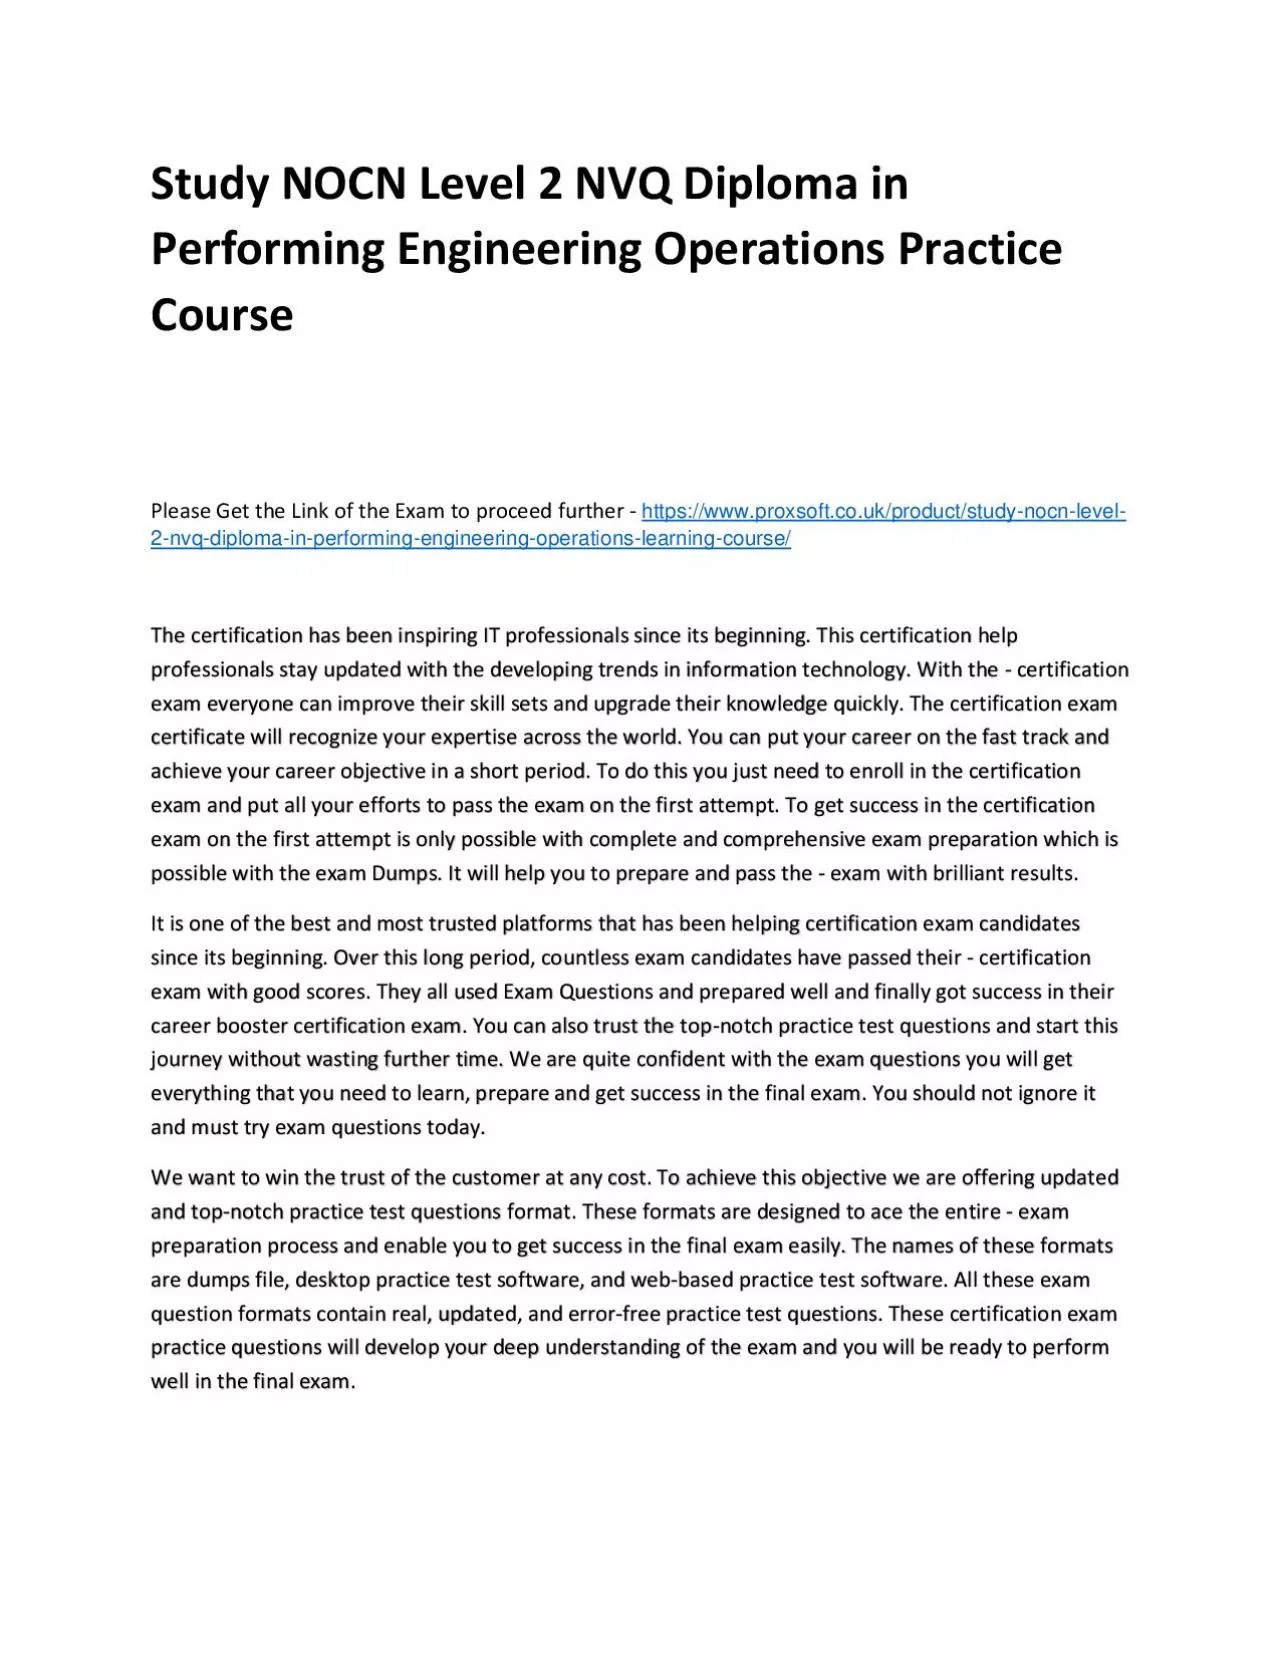 Study NOCN Level 2 NVQ Diploma in Performing Engineering Operations Practice Course